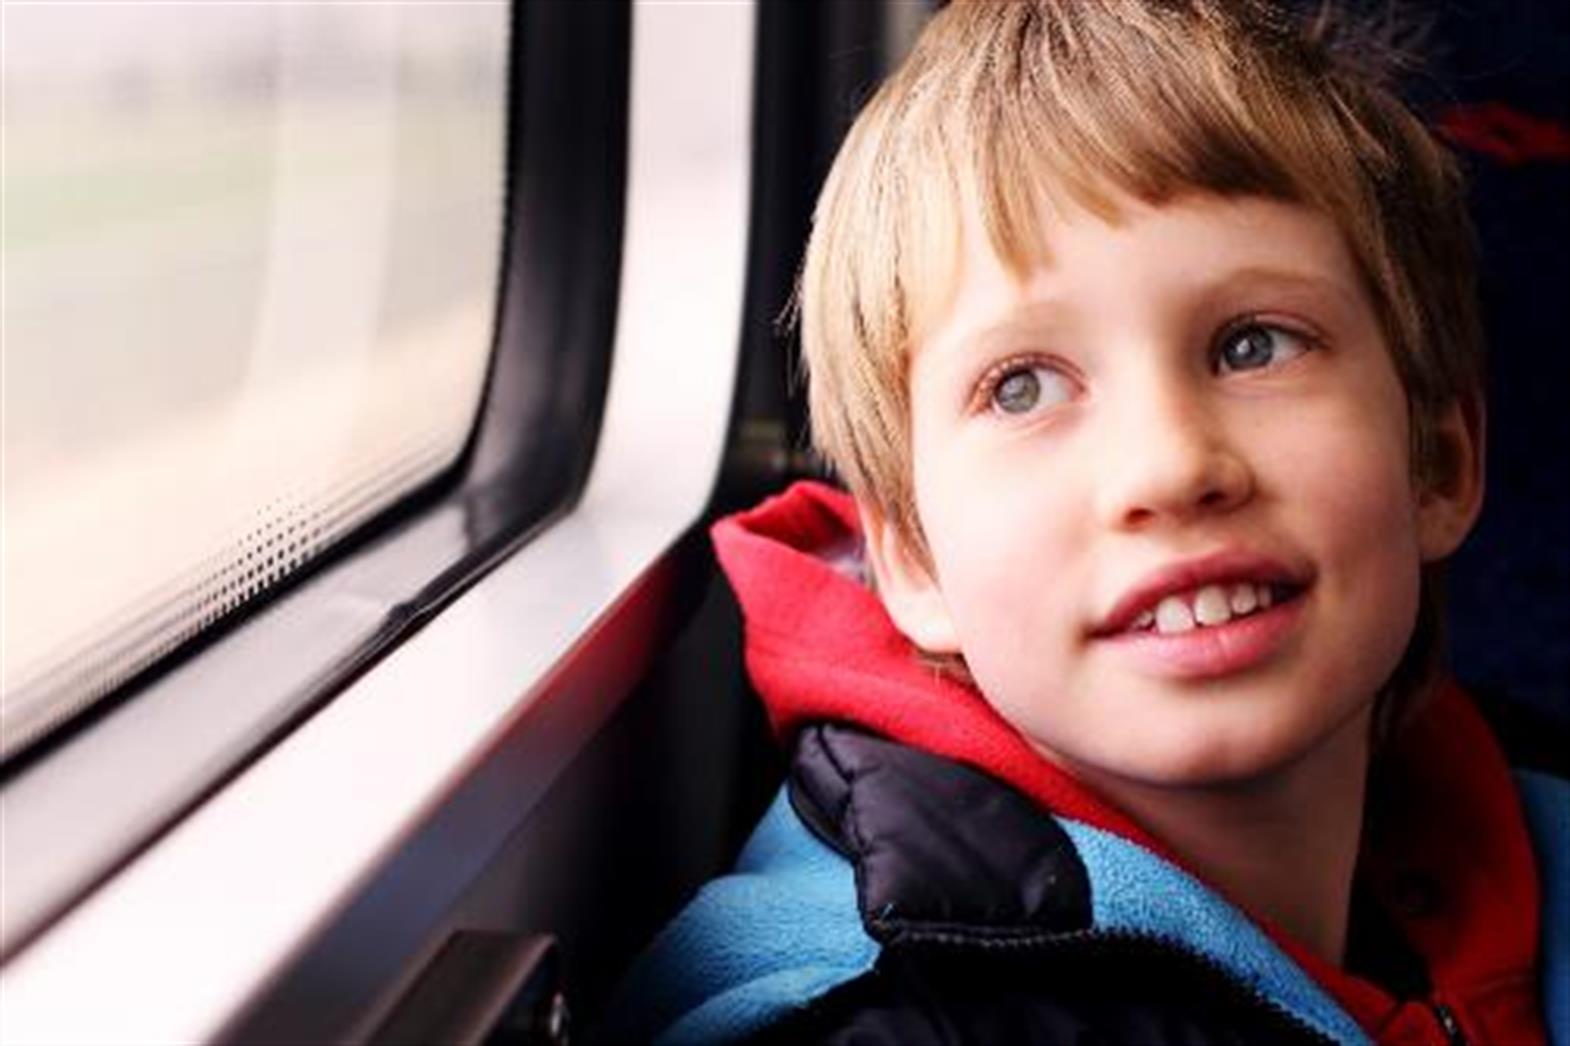 Boy about 9 years old looks out of a train window smiling